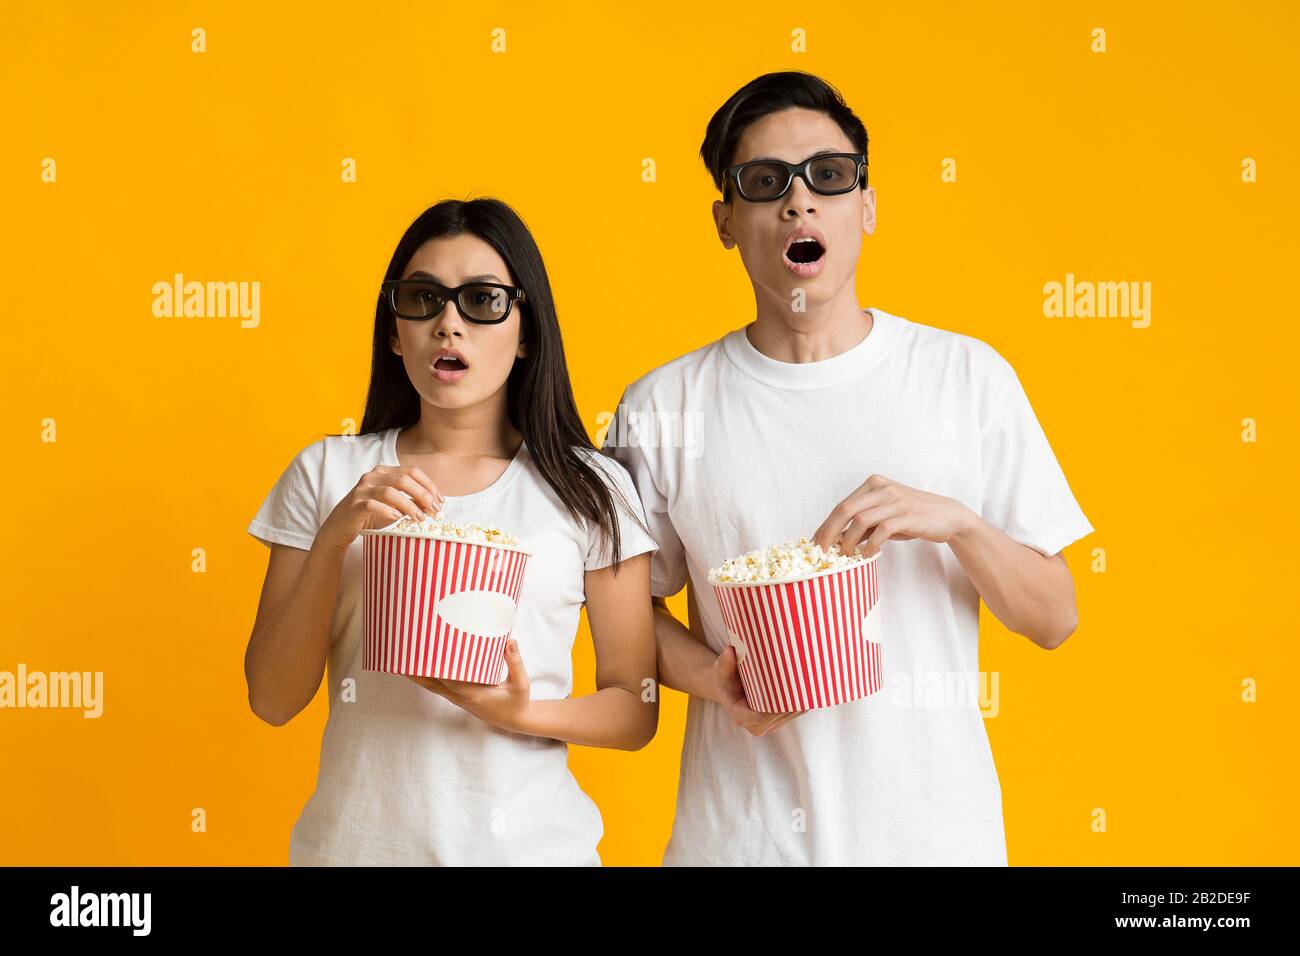 Stunned asian couple in 3d glasses watching movie with popcorn Stock Photo